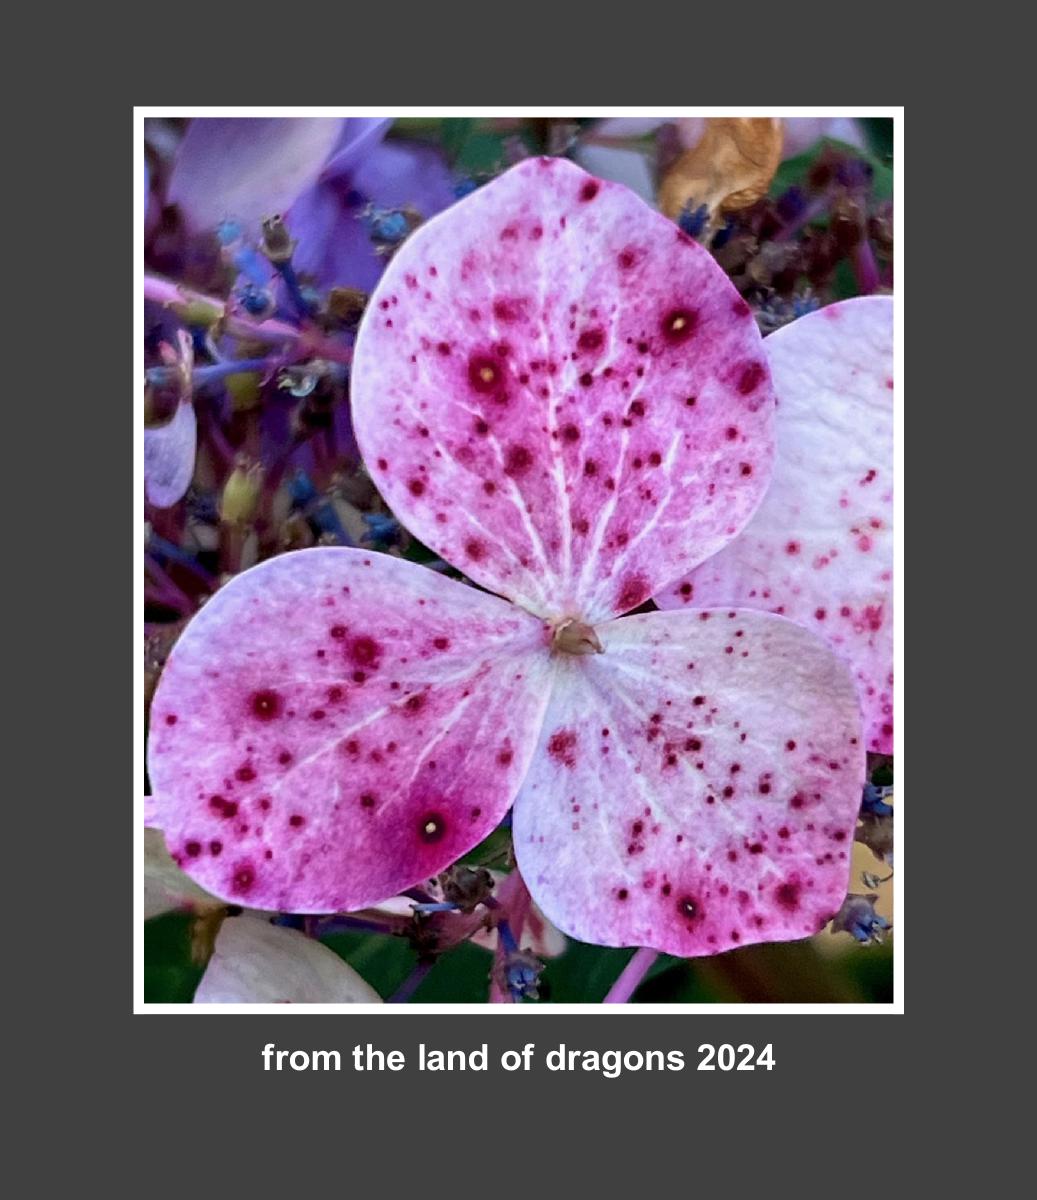 from the land of dragons 2024